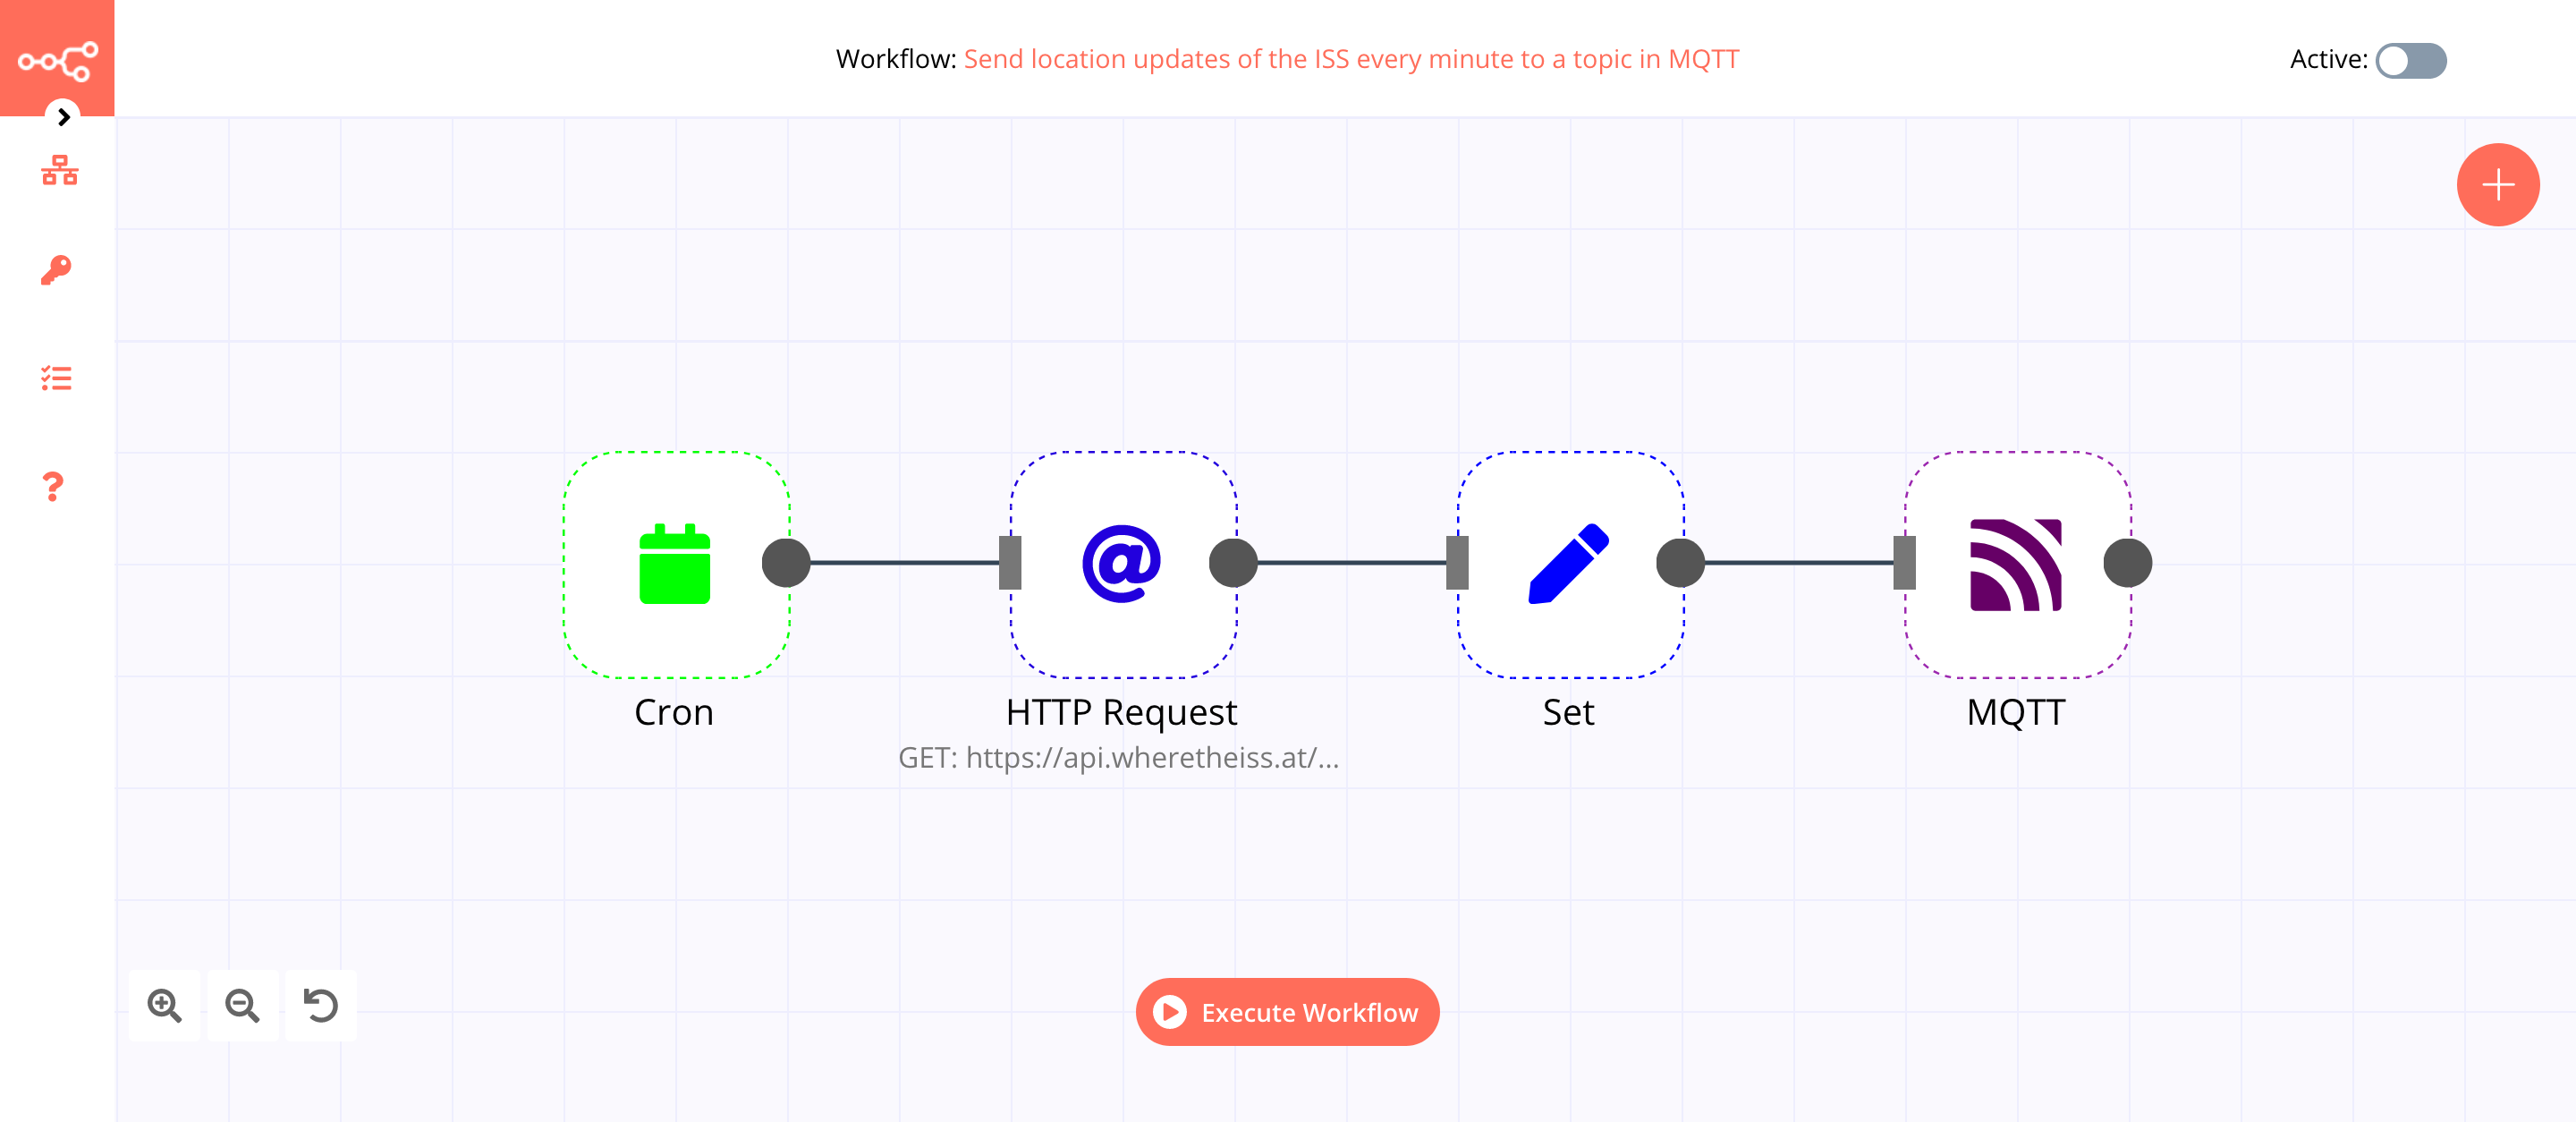 A workflow with the MQTT node